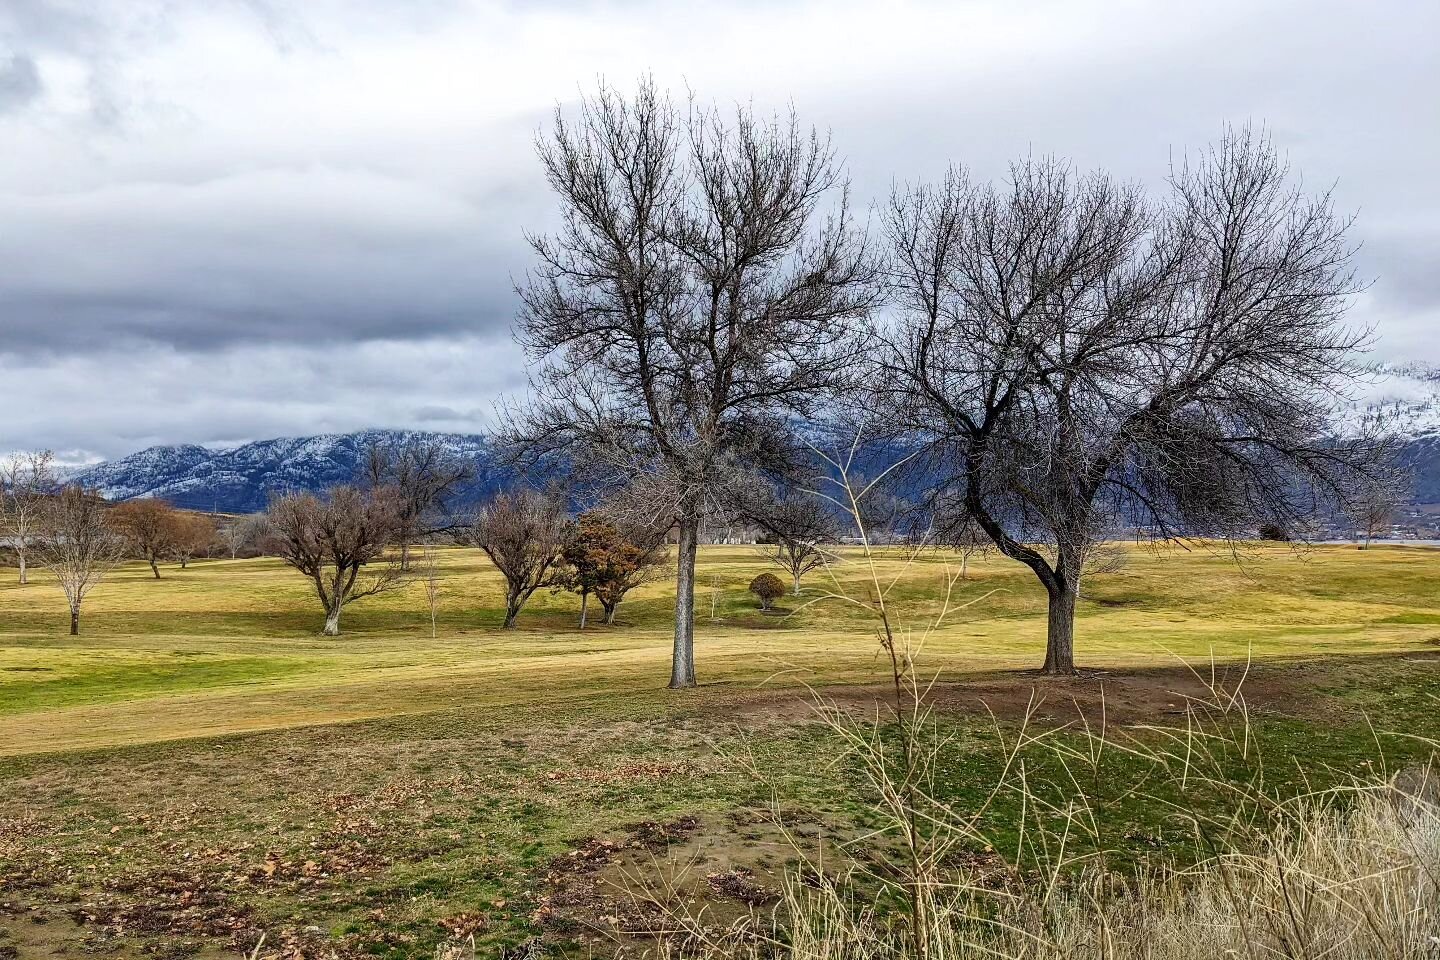 Touch of snow quickly gone #osoyoos